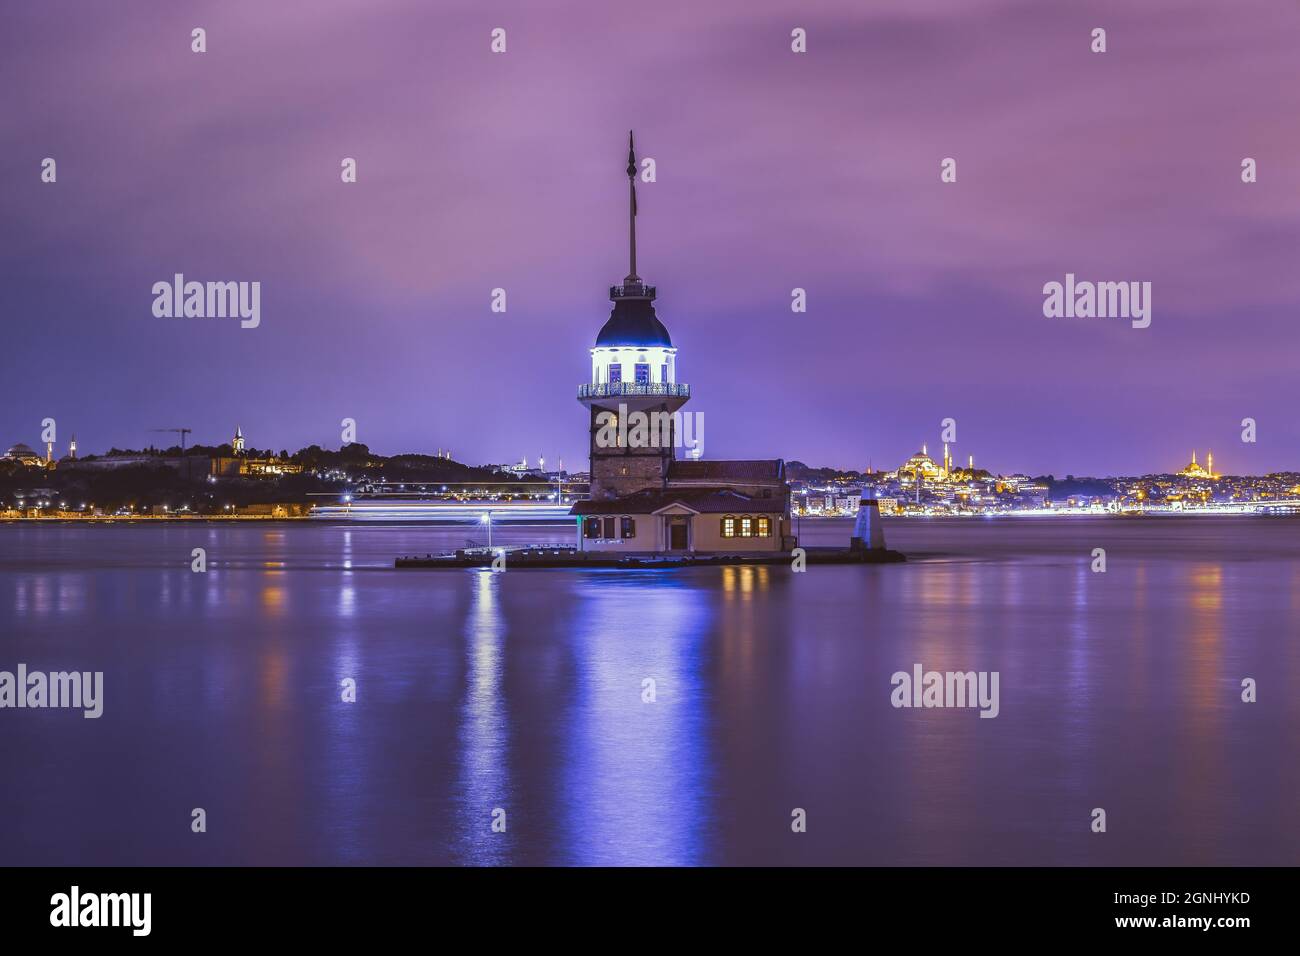 Maiden's Tower, 'Kiz Kulesi' at night, Long exposure view from Üsküdar-Istanbul and a beautiful reflection of its lights on the Marmara Sea Bosphorus. Stock Photo